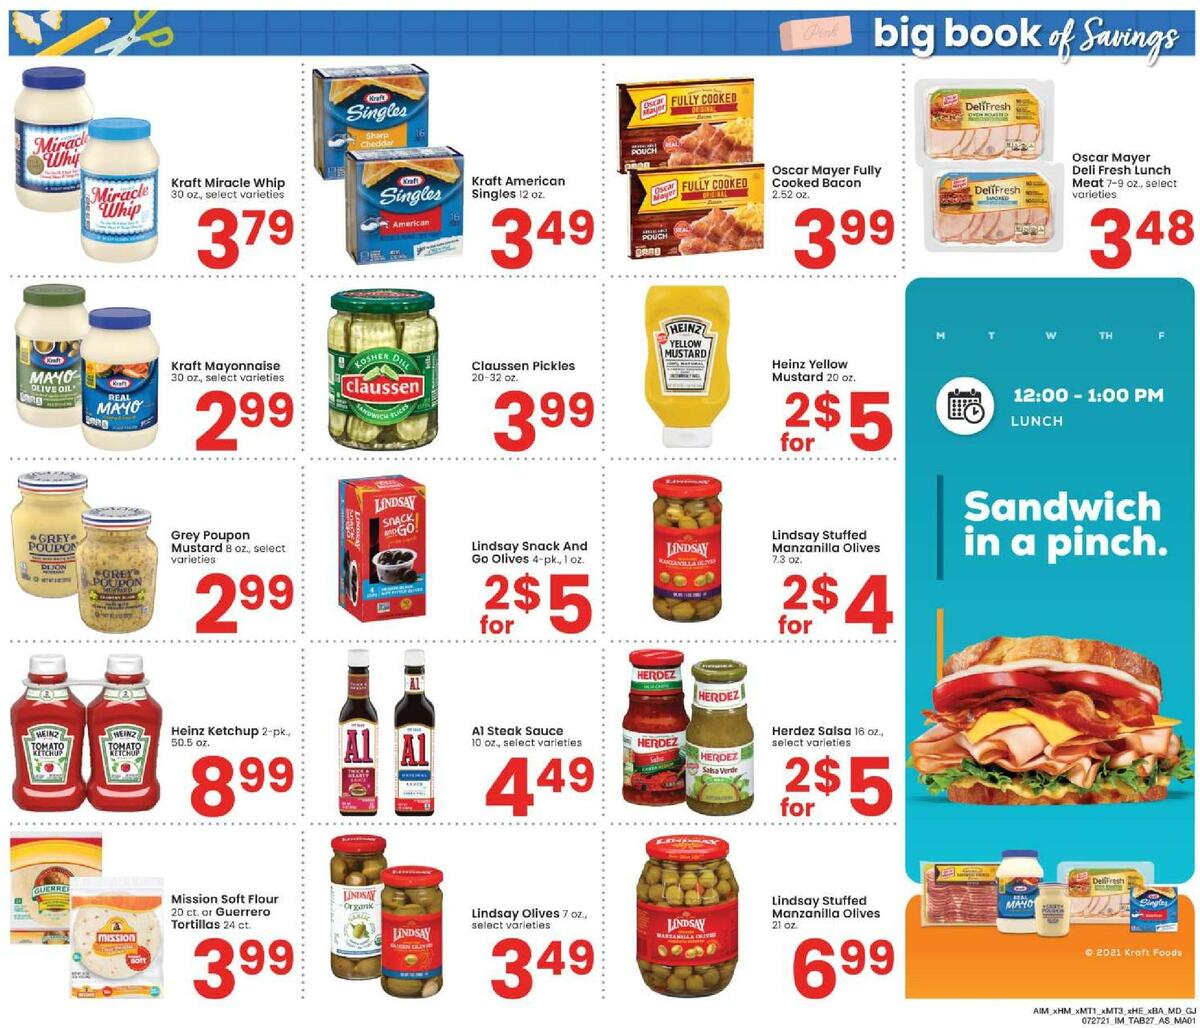 Albertsons Big Book of Savings Weekly Ad from July 27